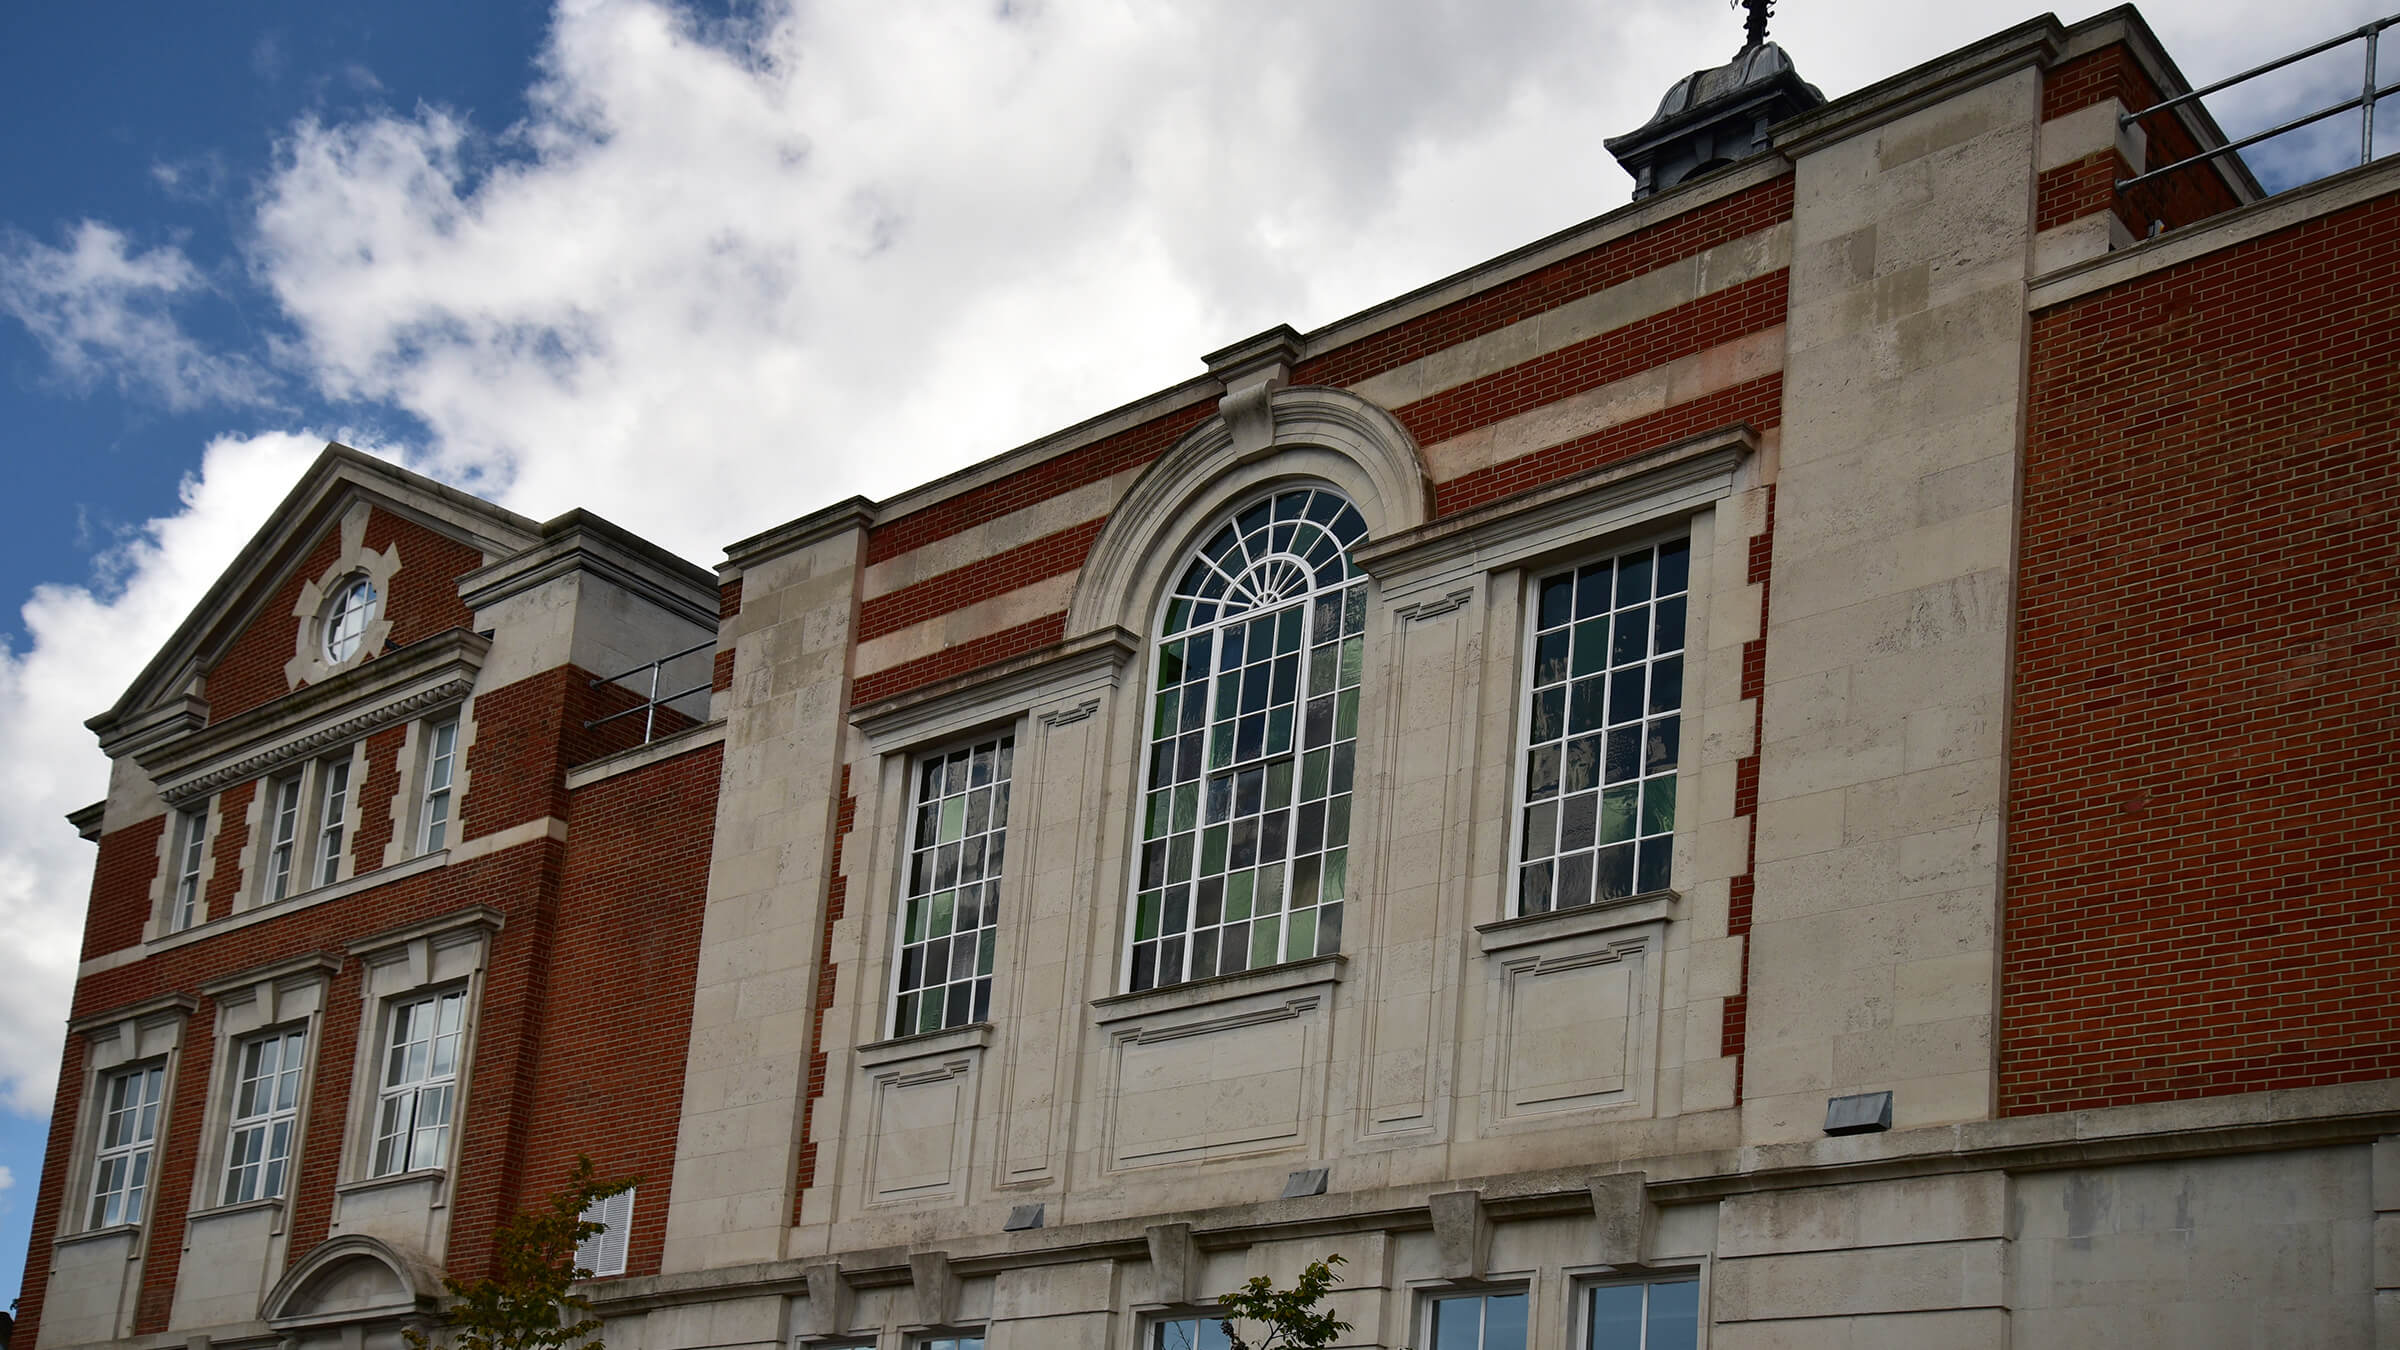 Acton Town Hall